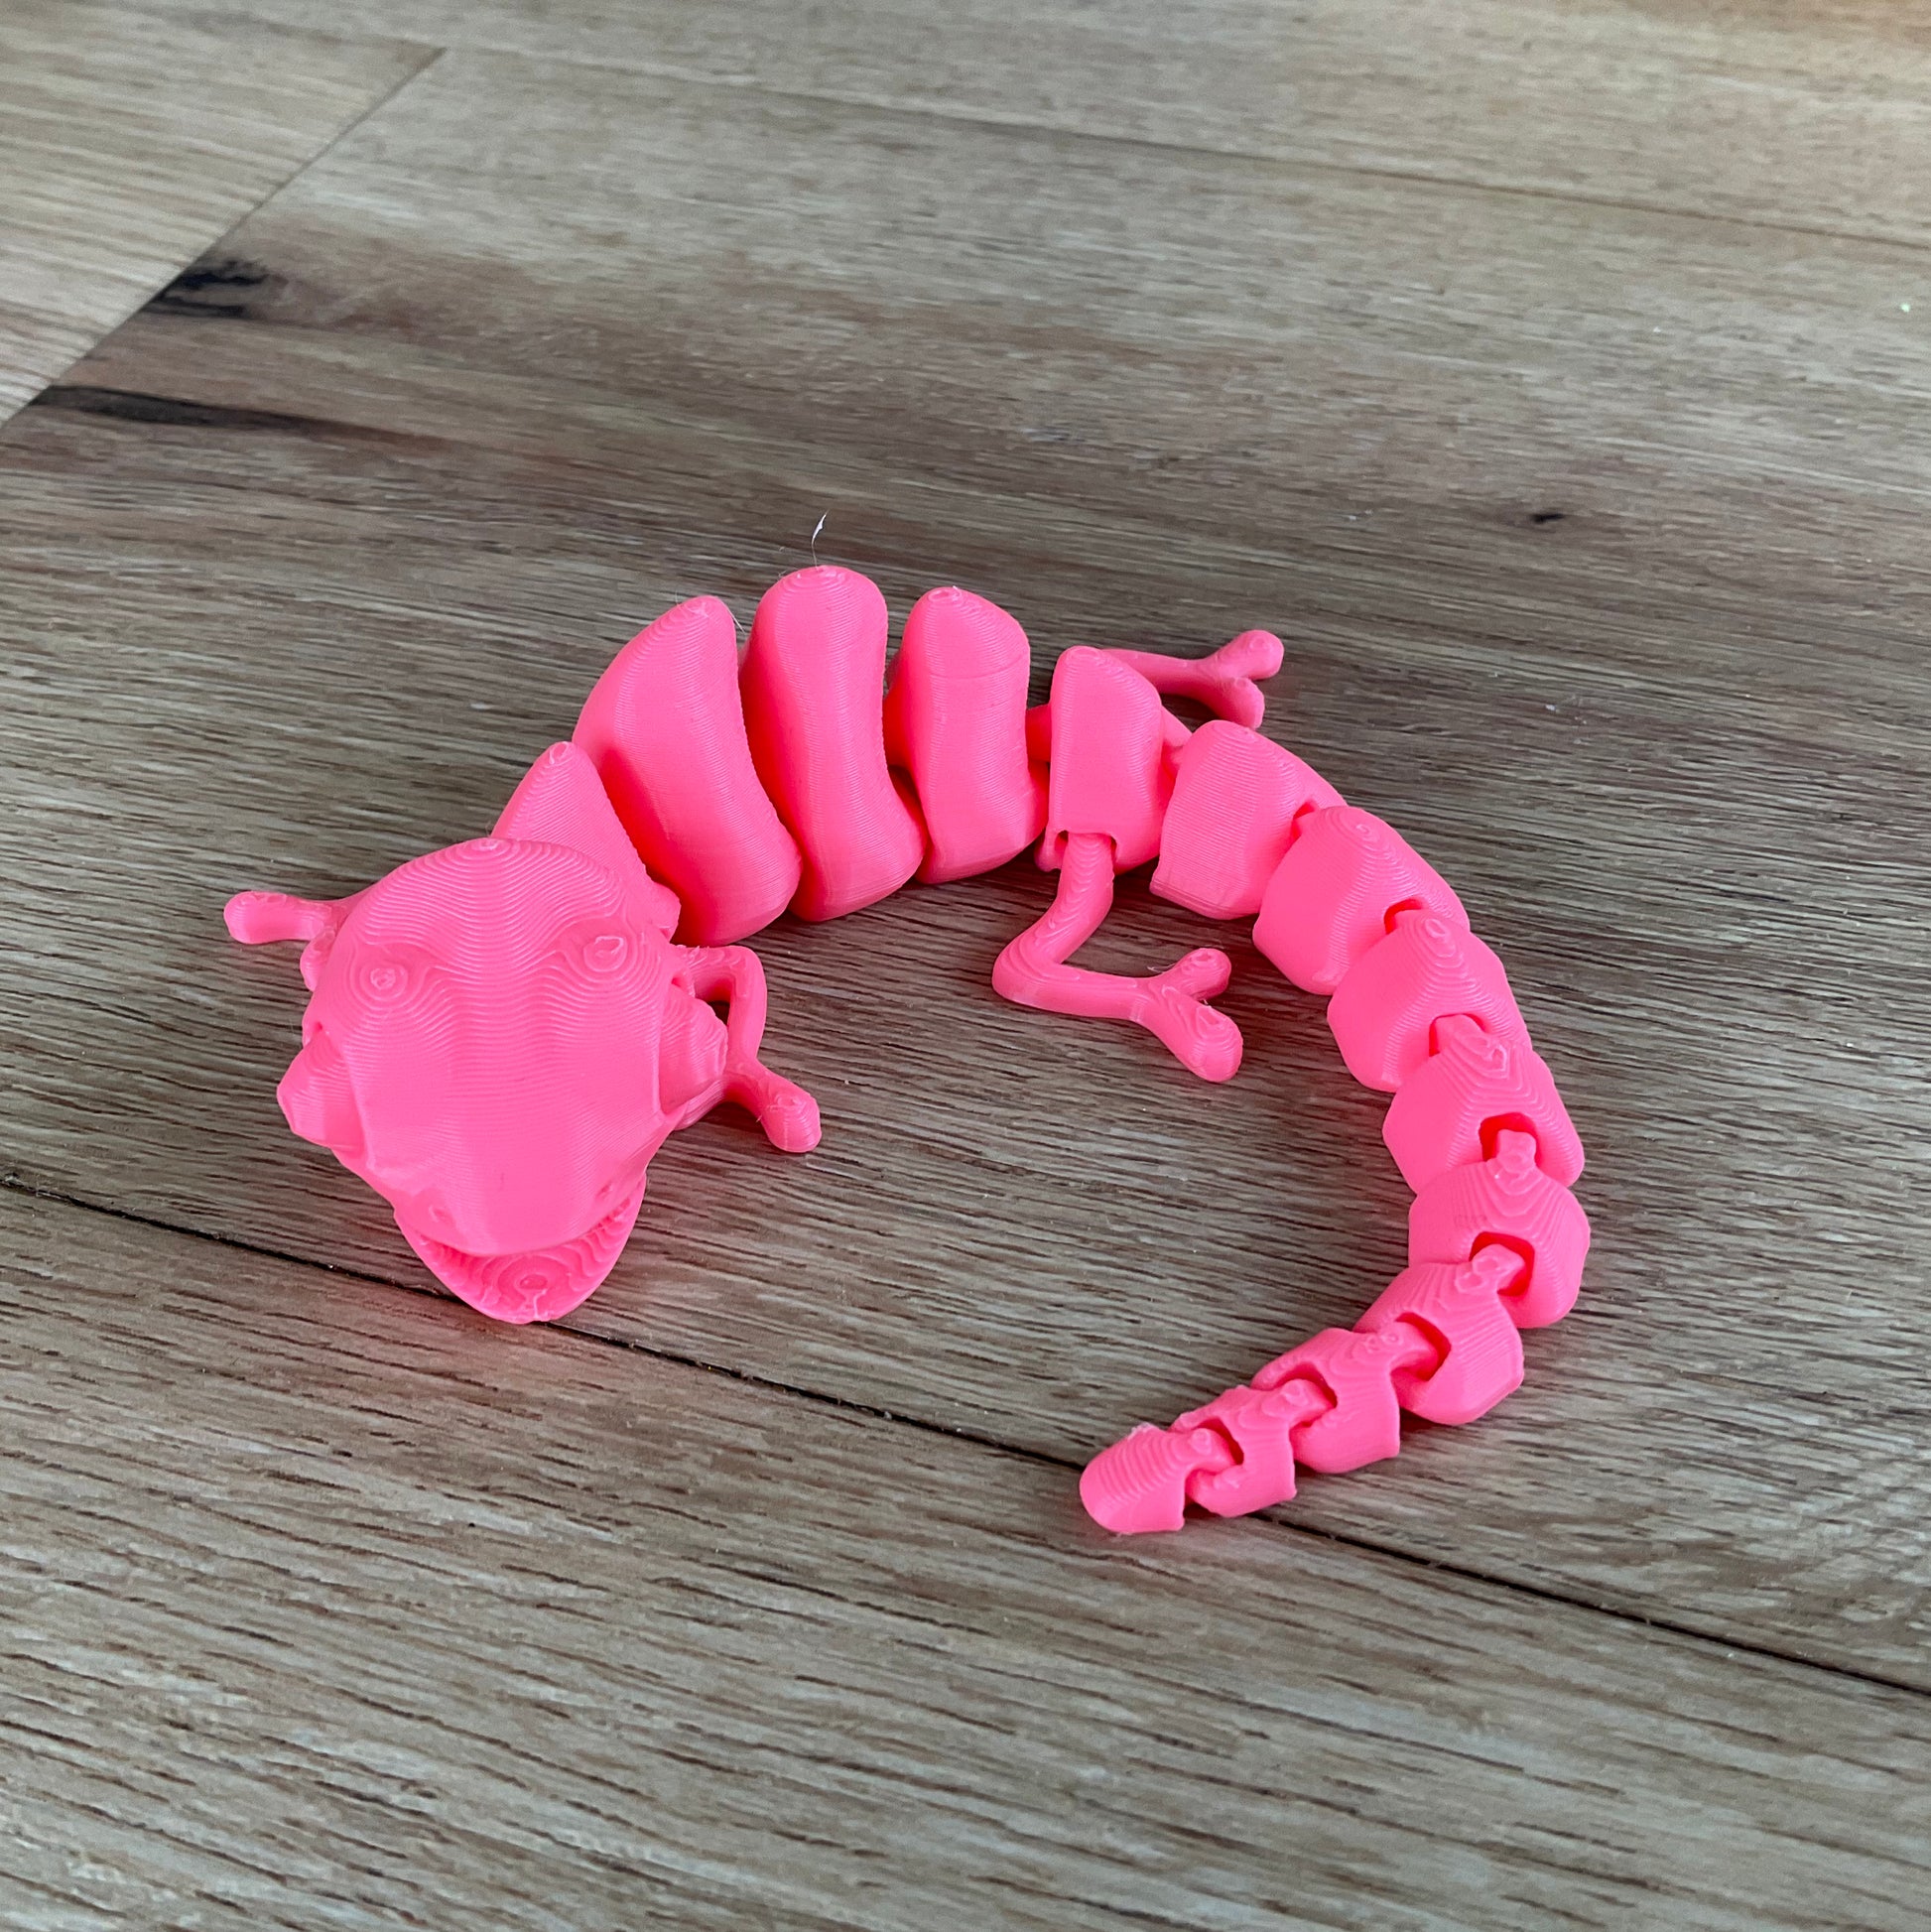 a picture of the chameleon fidget toy in pink.